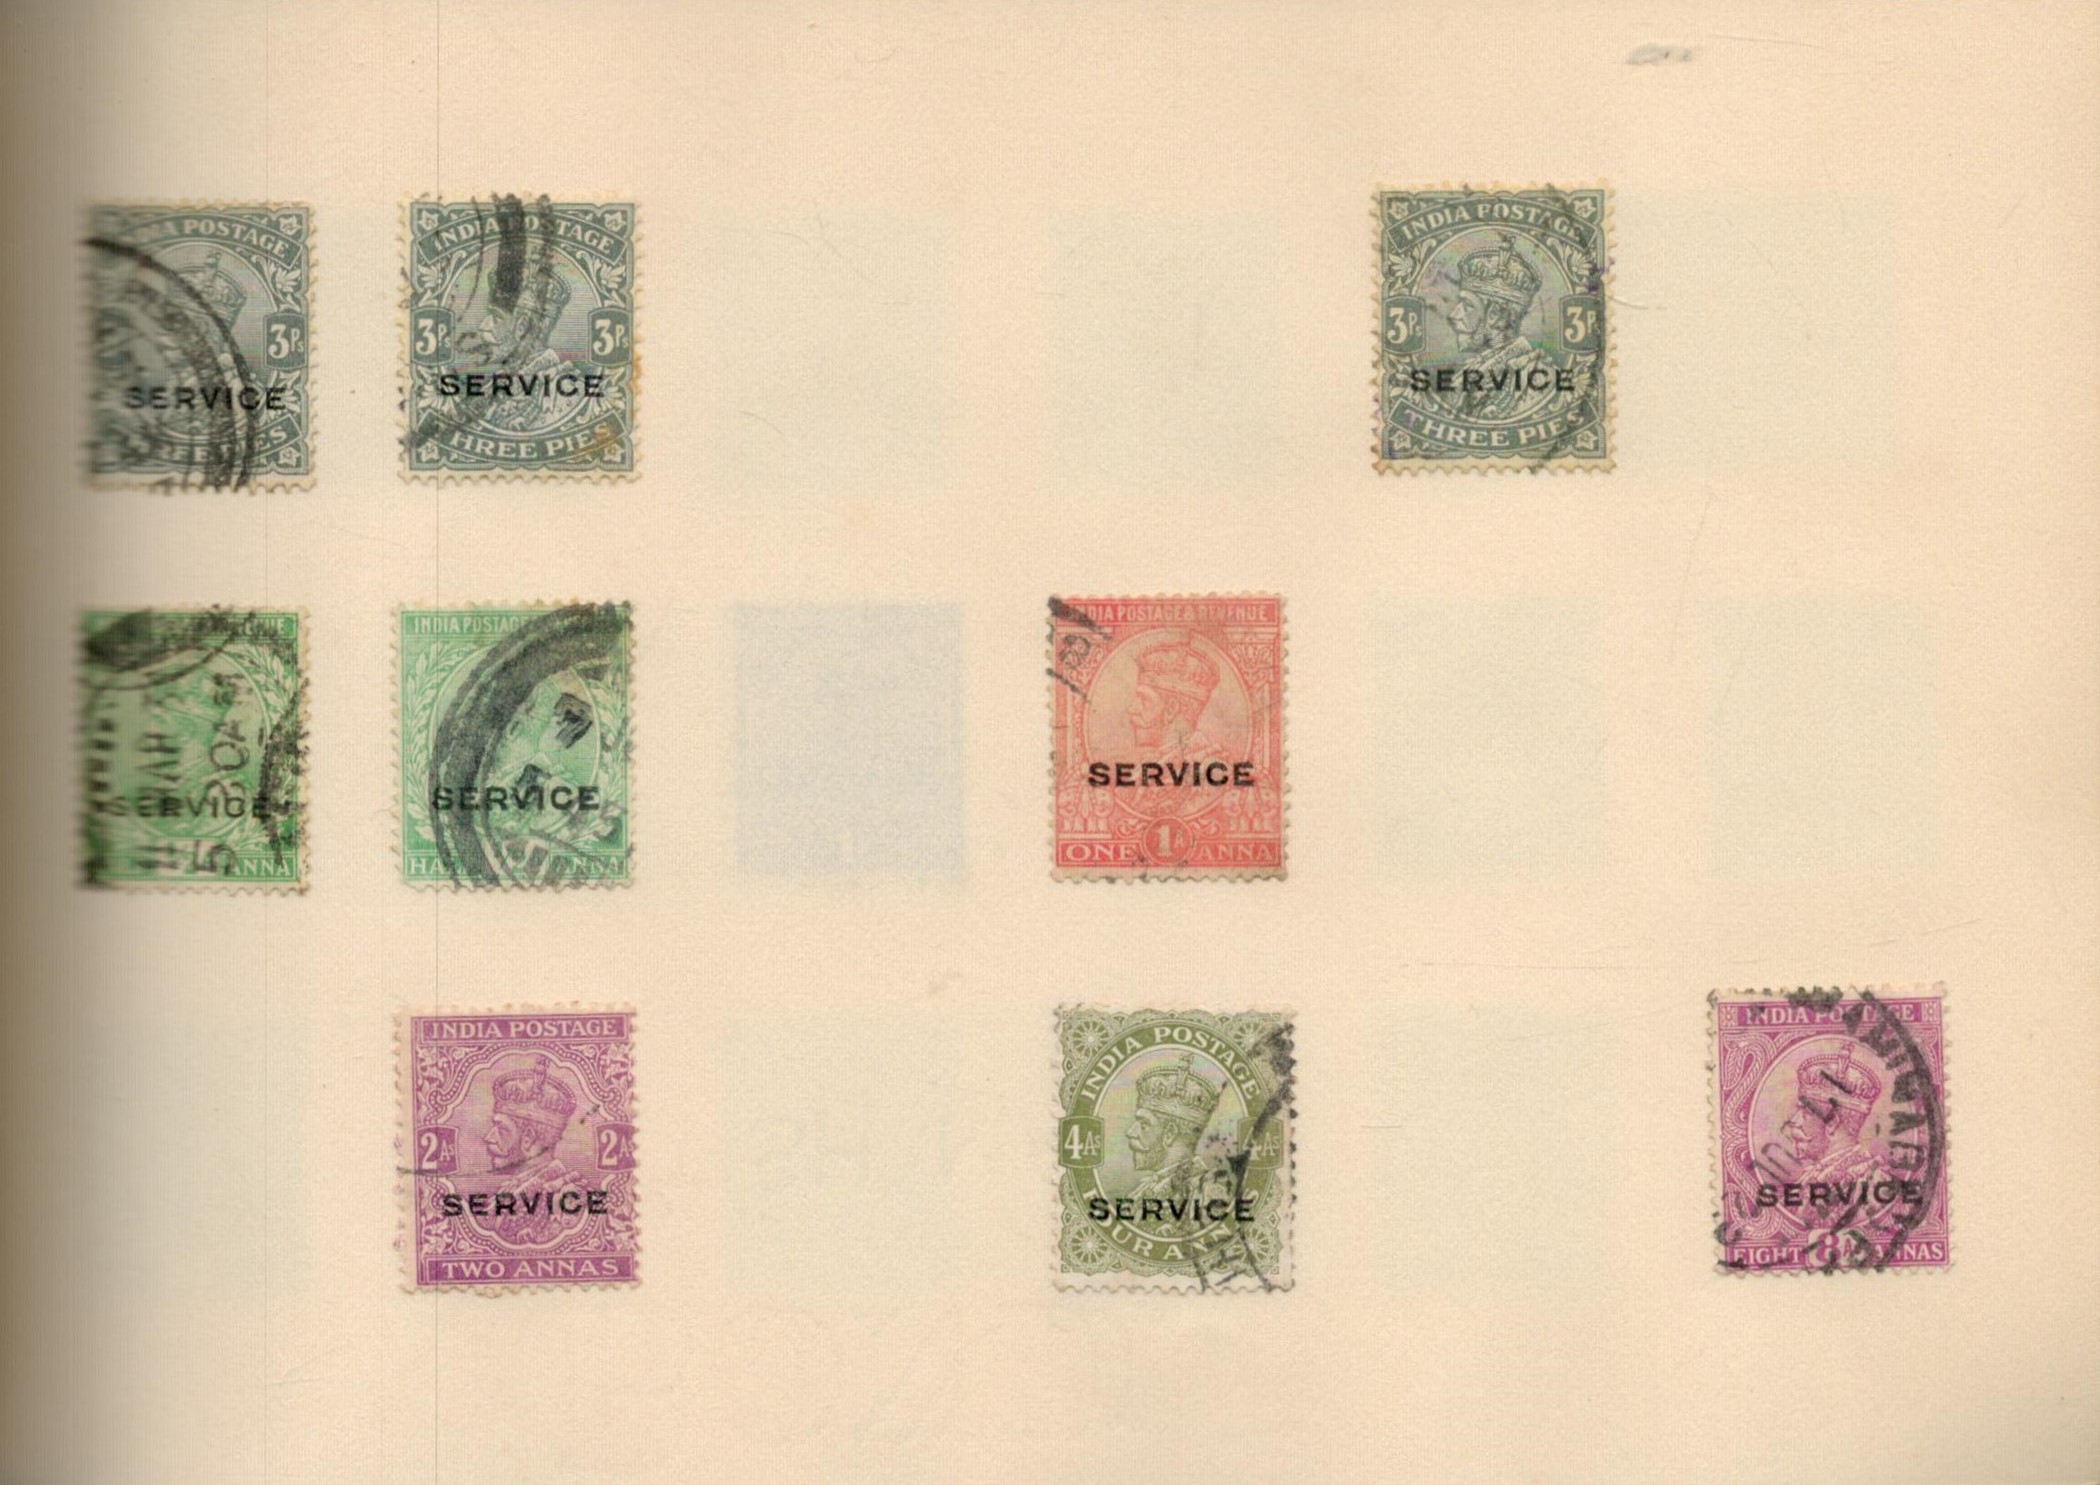 Worldwide Stamps in a Twinlock Crown Loose Leaf Binder countries include India, Iraq, Ireland, - Image 2 of 4